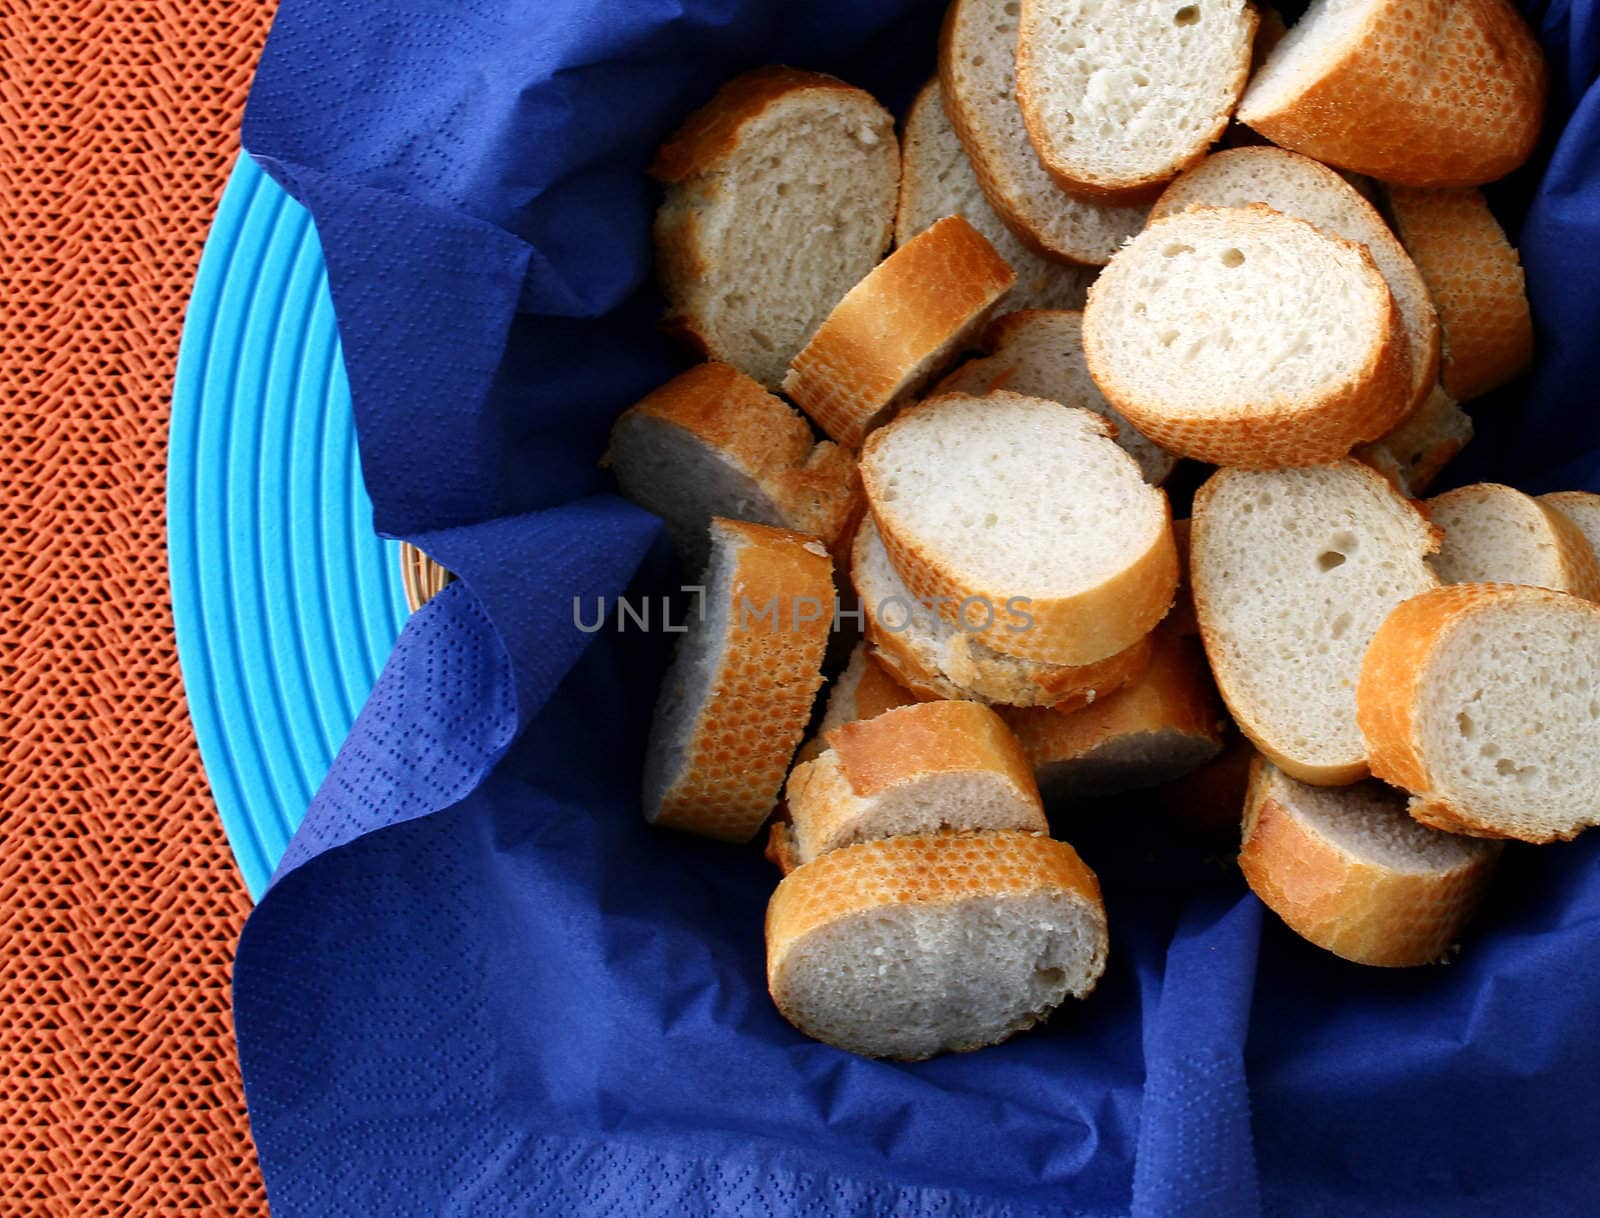 bread slices in a basket